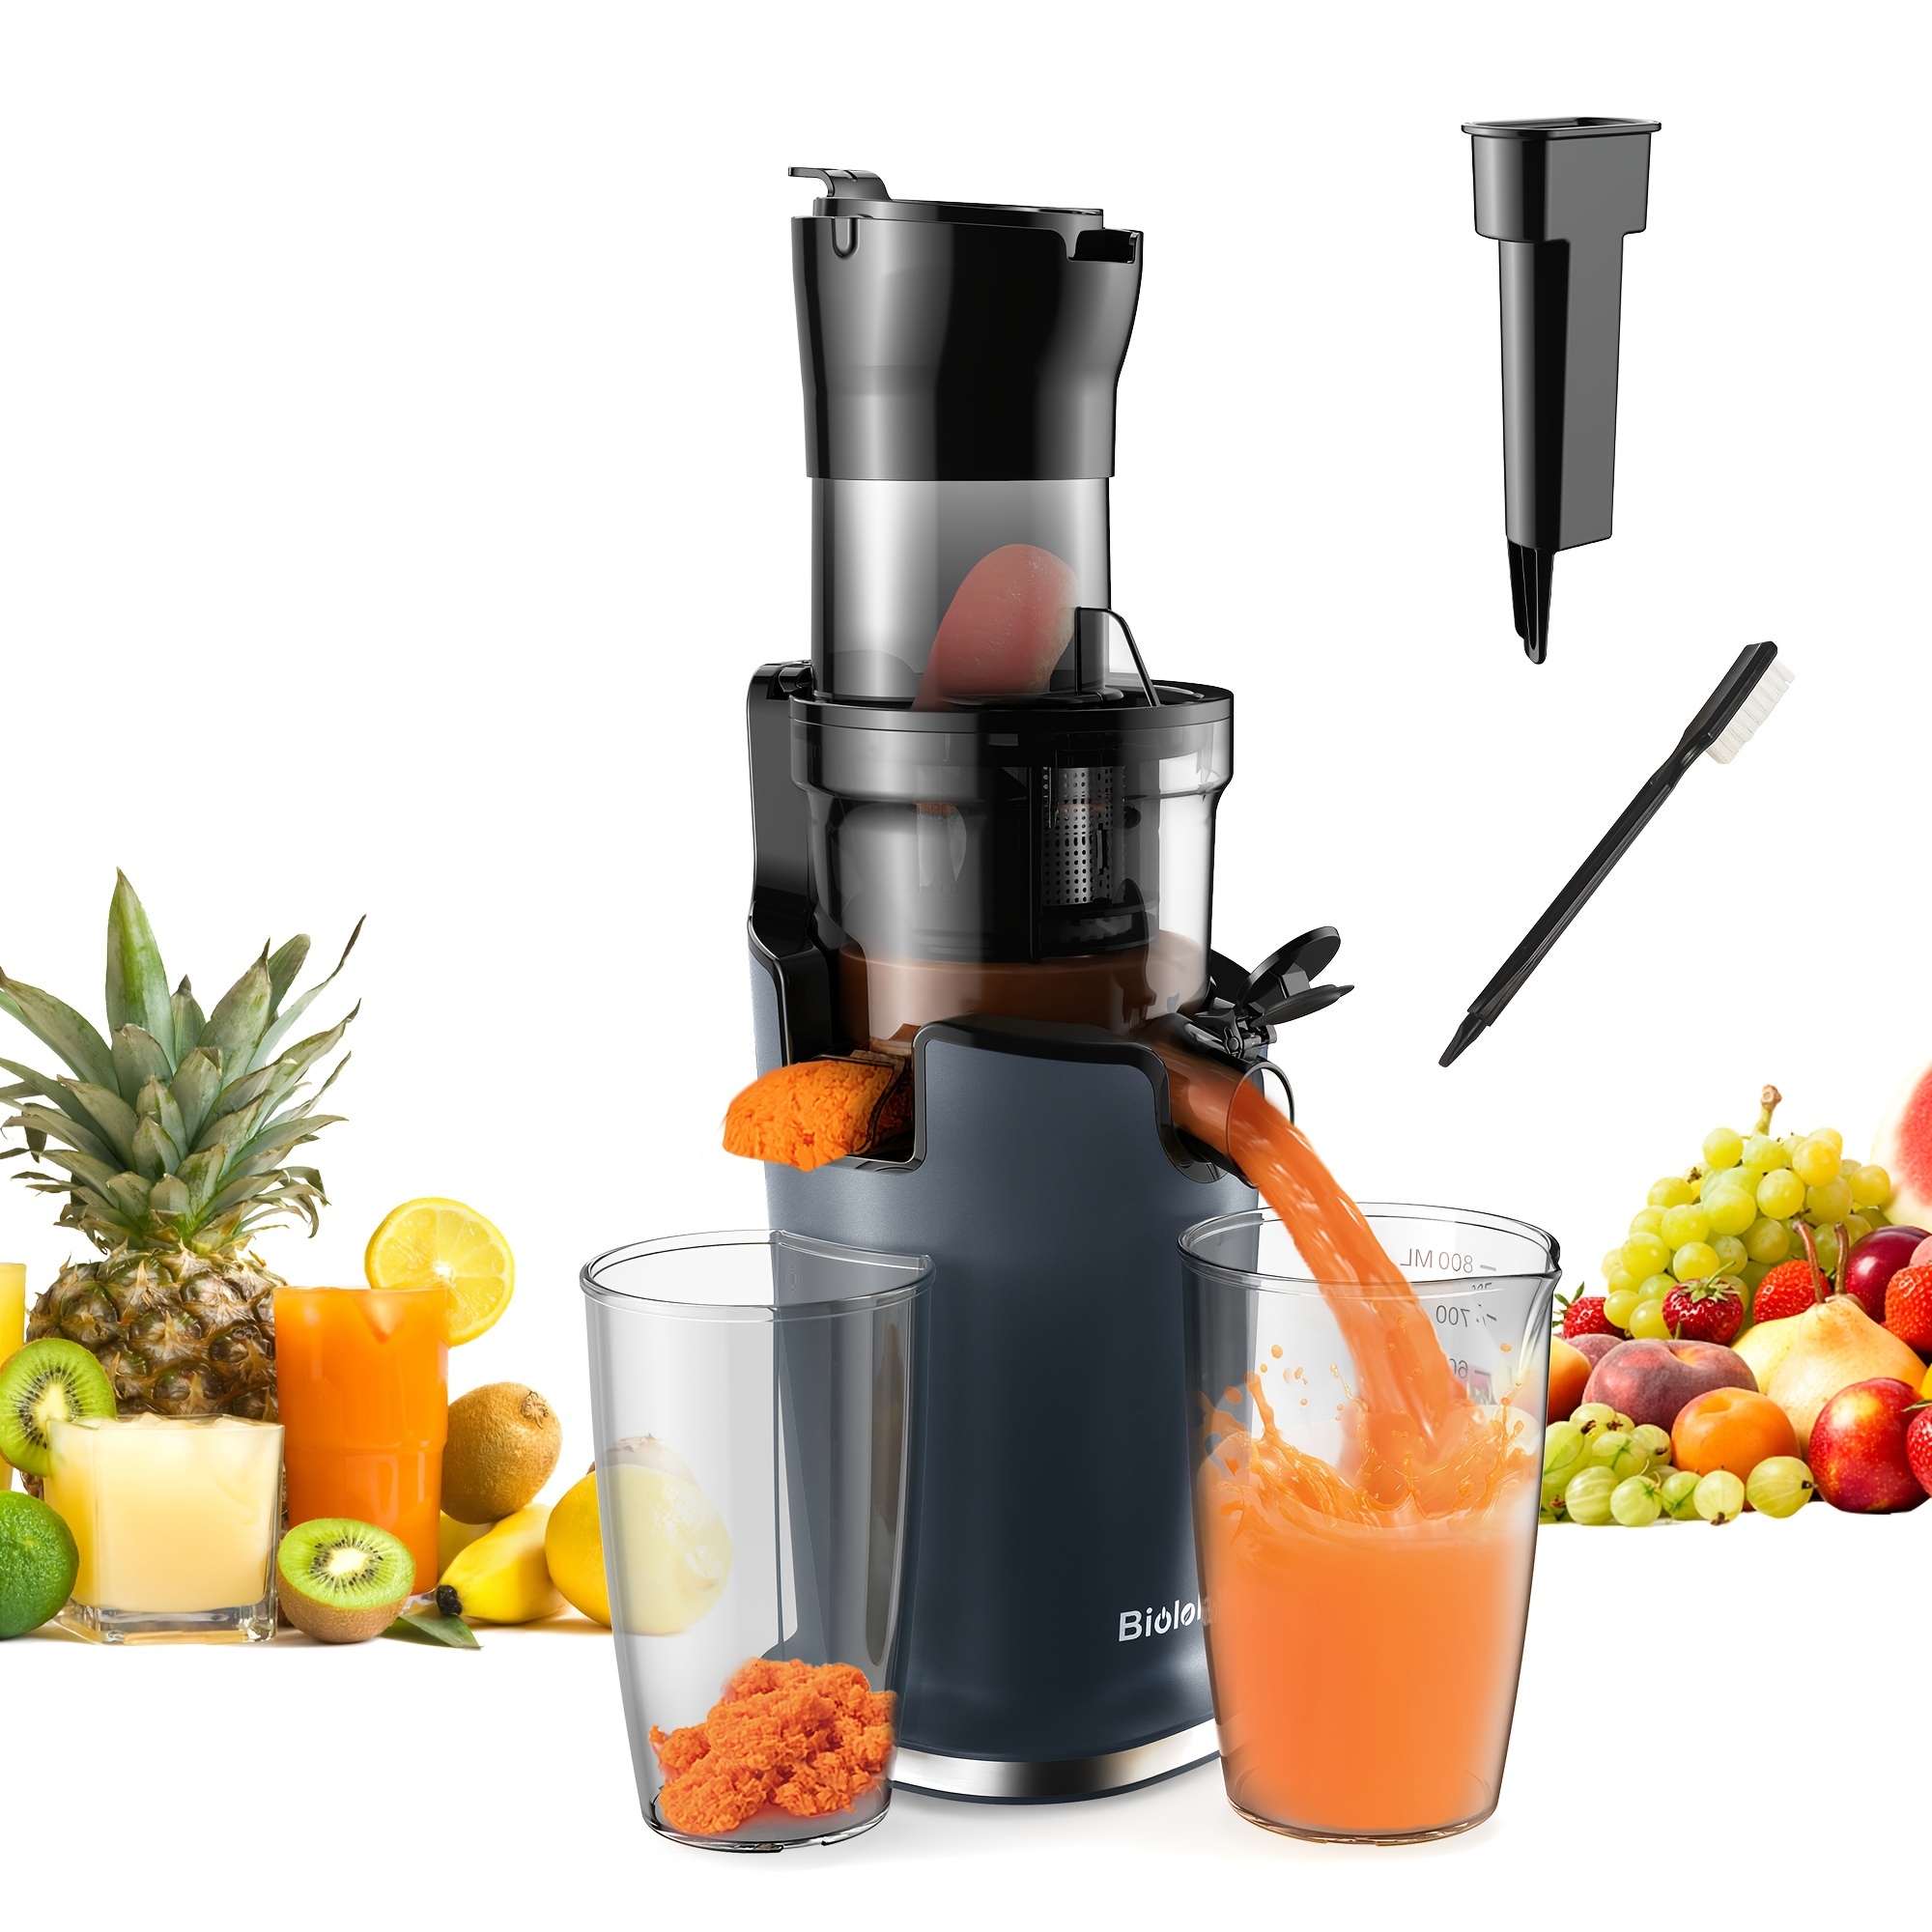 SiFENE Juicer Machine, 1000W(Peak) Centrifugal Juicer with 3.2 Big Mouth  for Whole Fruits and Veggies, Juice Extractor Maker with 3 Speeds Settings,  Easy to Clean, BPA Free (Red) 